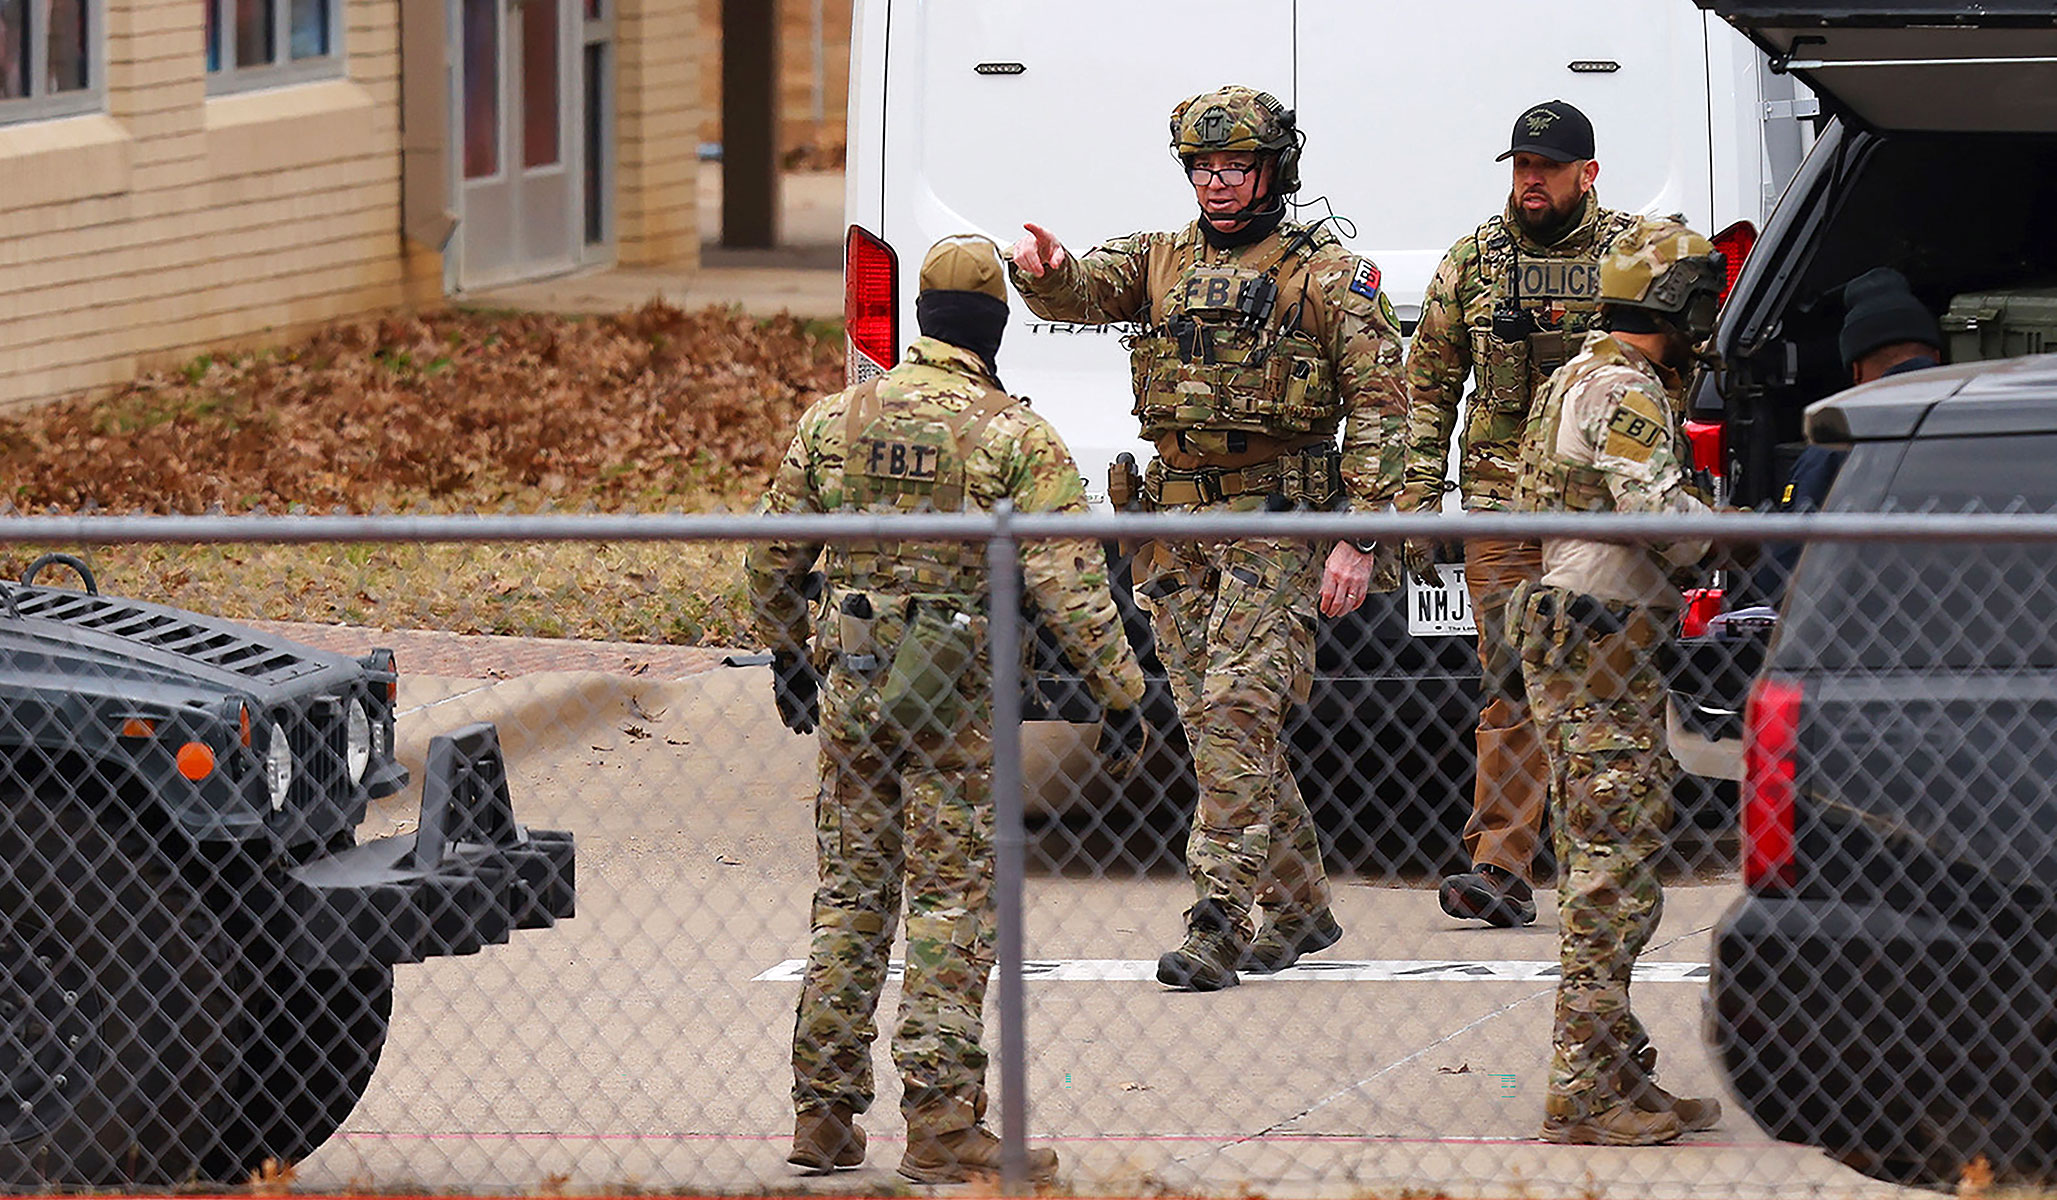 Texas Synagogue Hostages Rescued; Hostage-Taker Dead